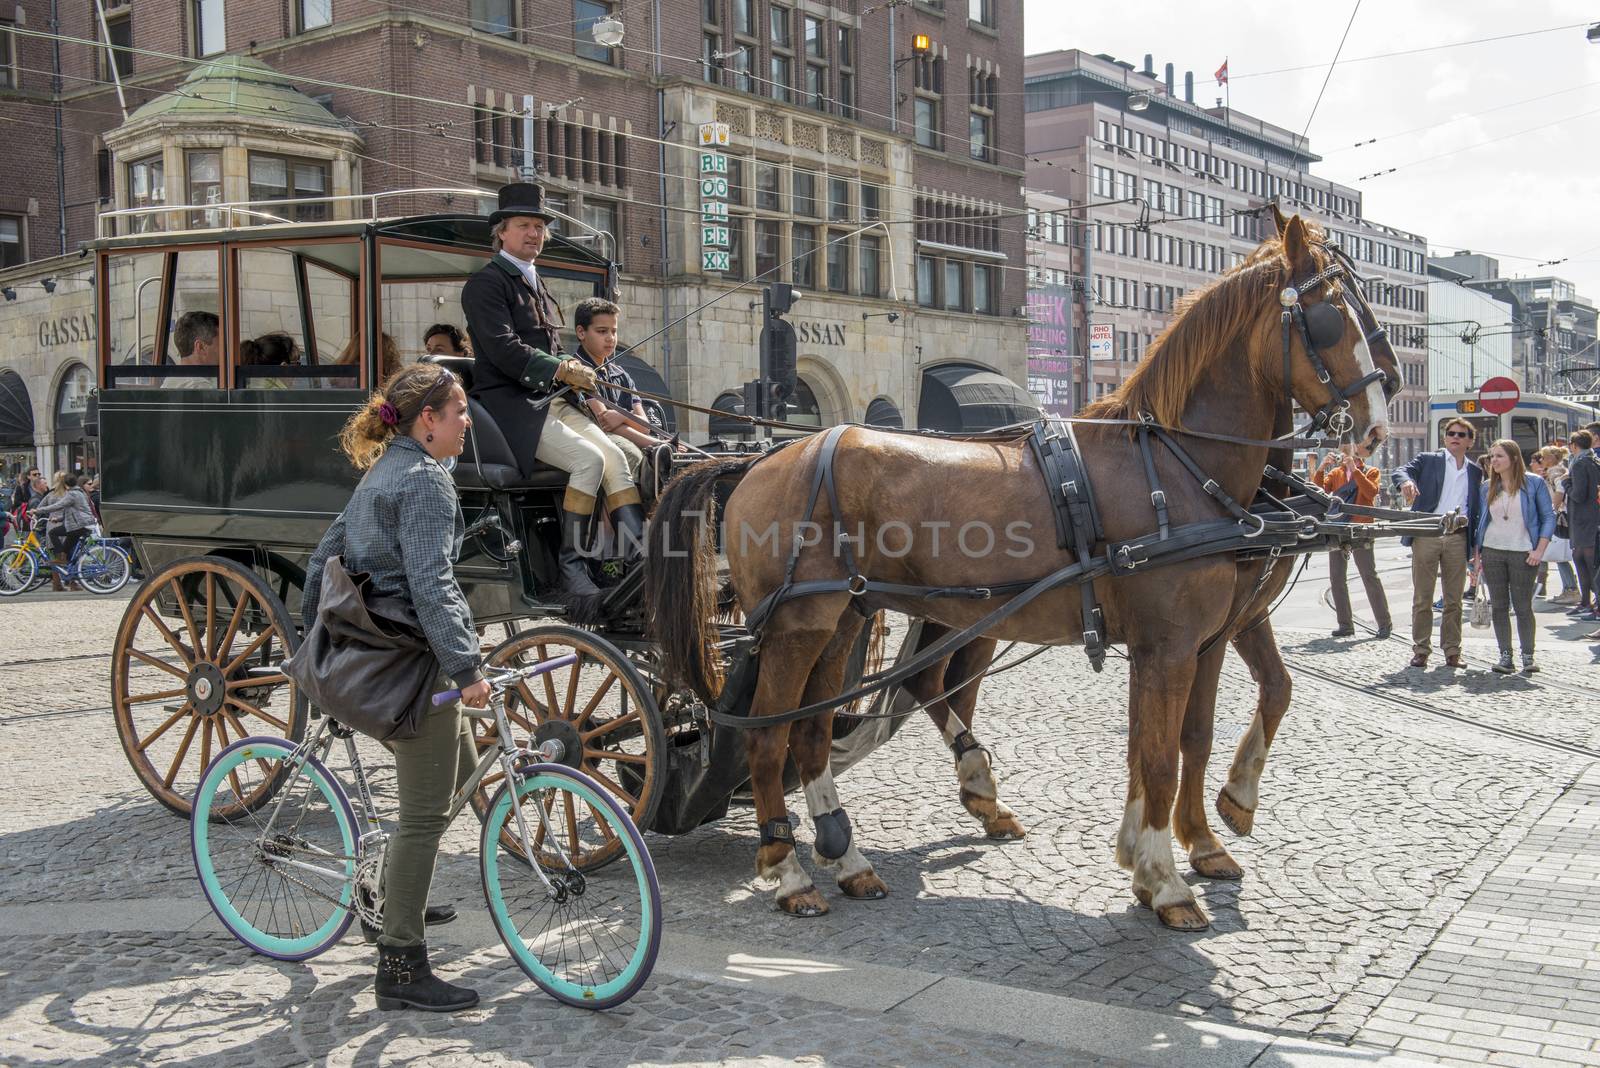 Amsterdam horse taxi by Alenmax